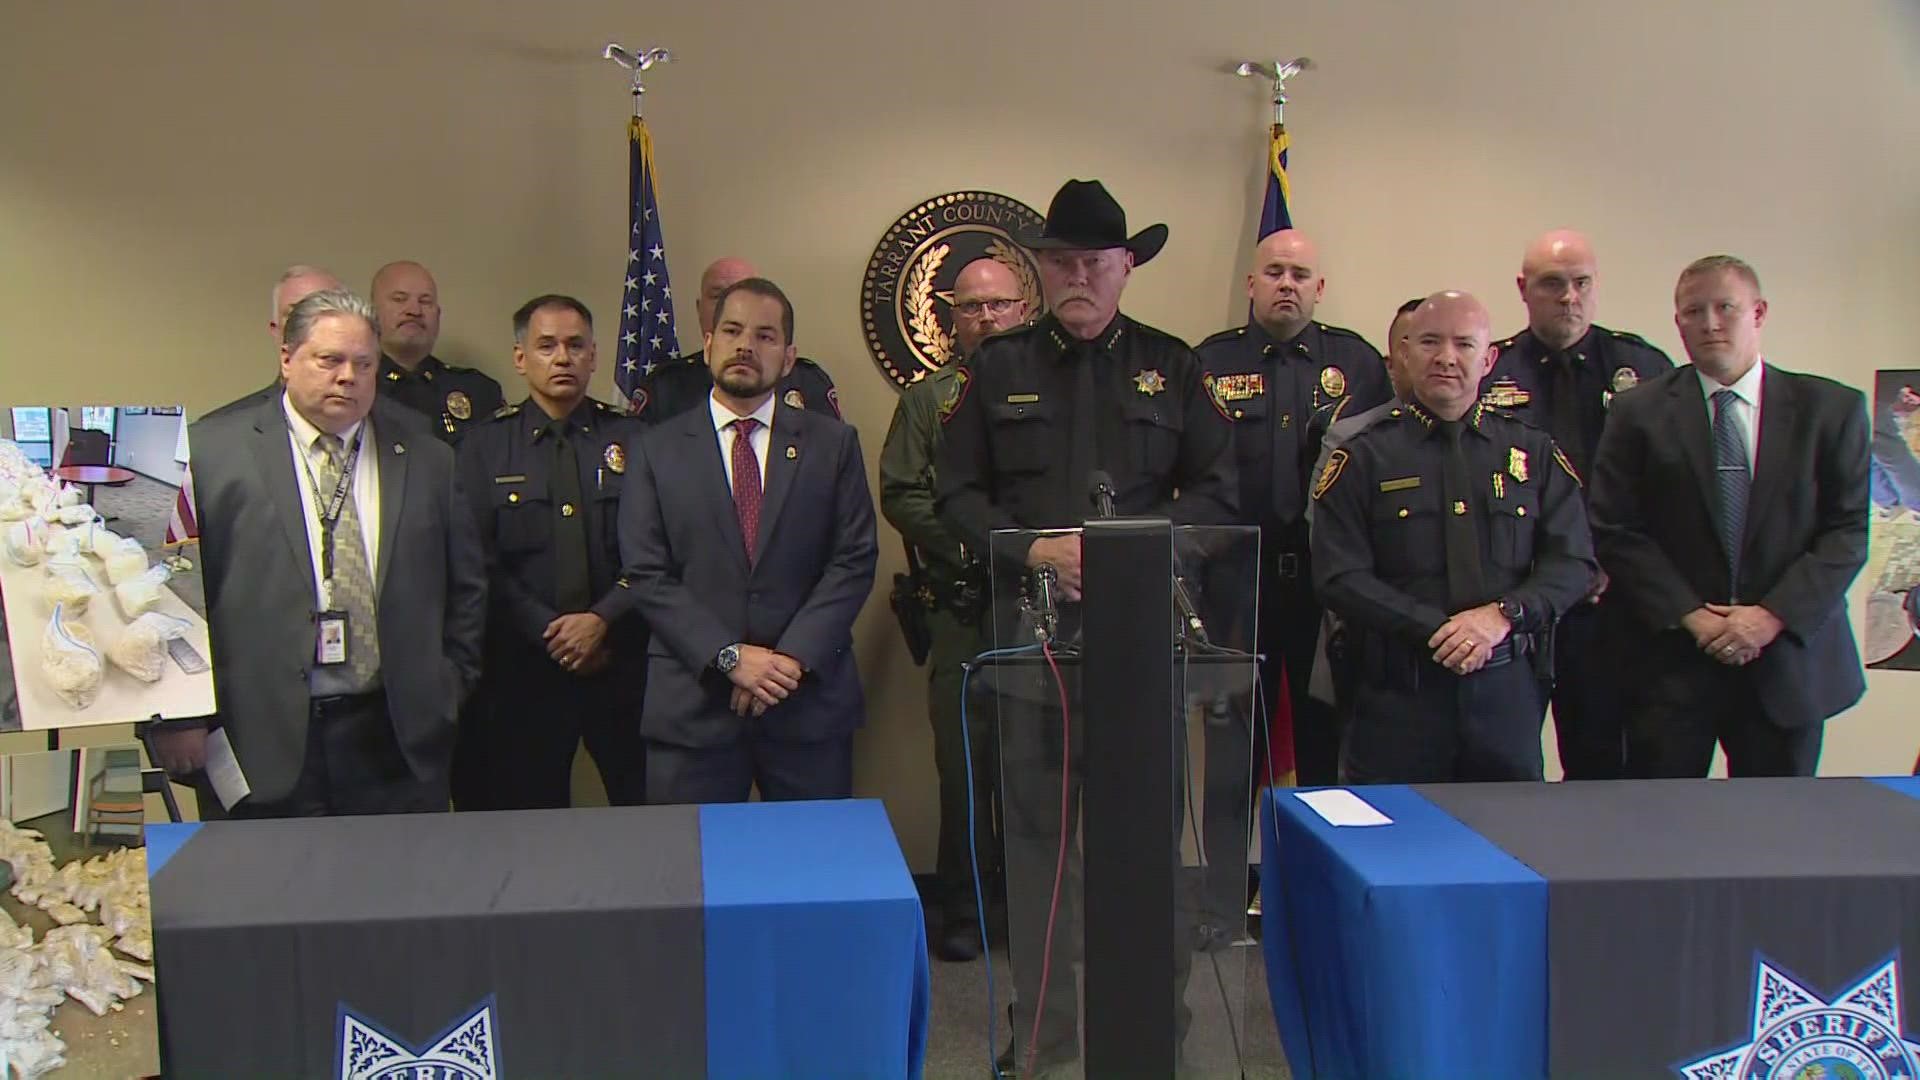 More than 1,400 pounds of meth were seized in Tarrant County over the last month.